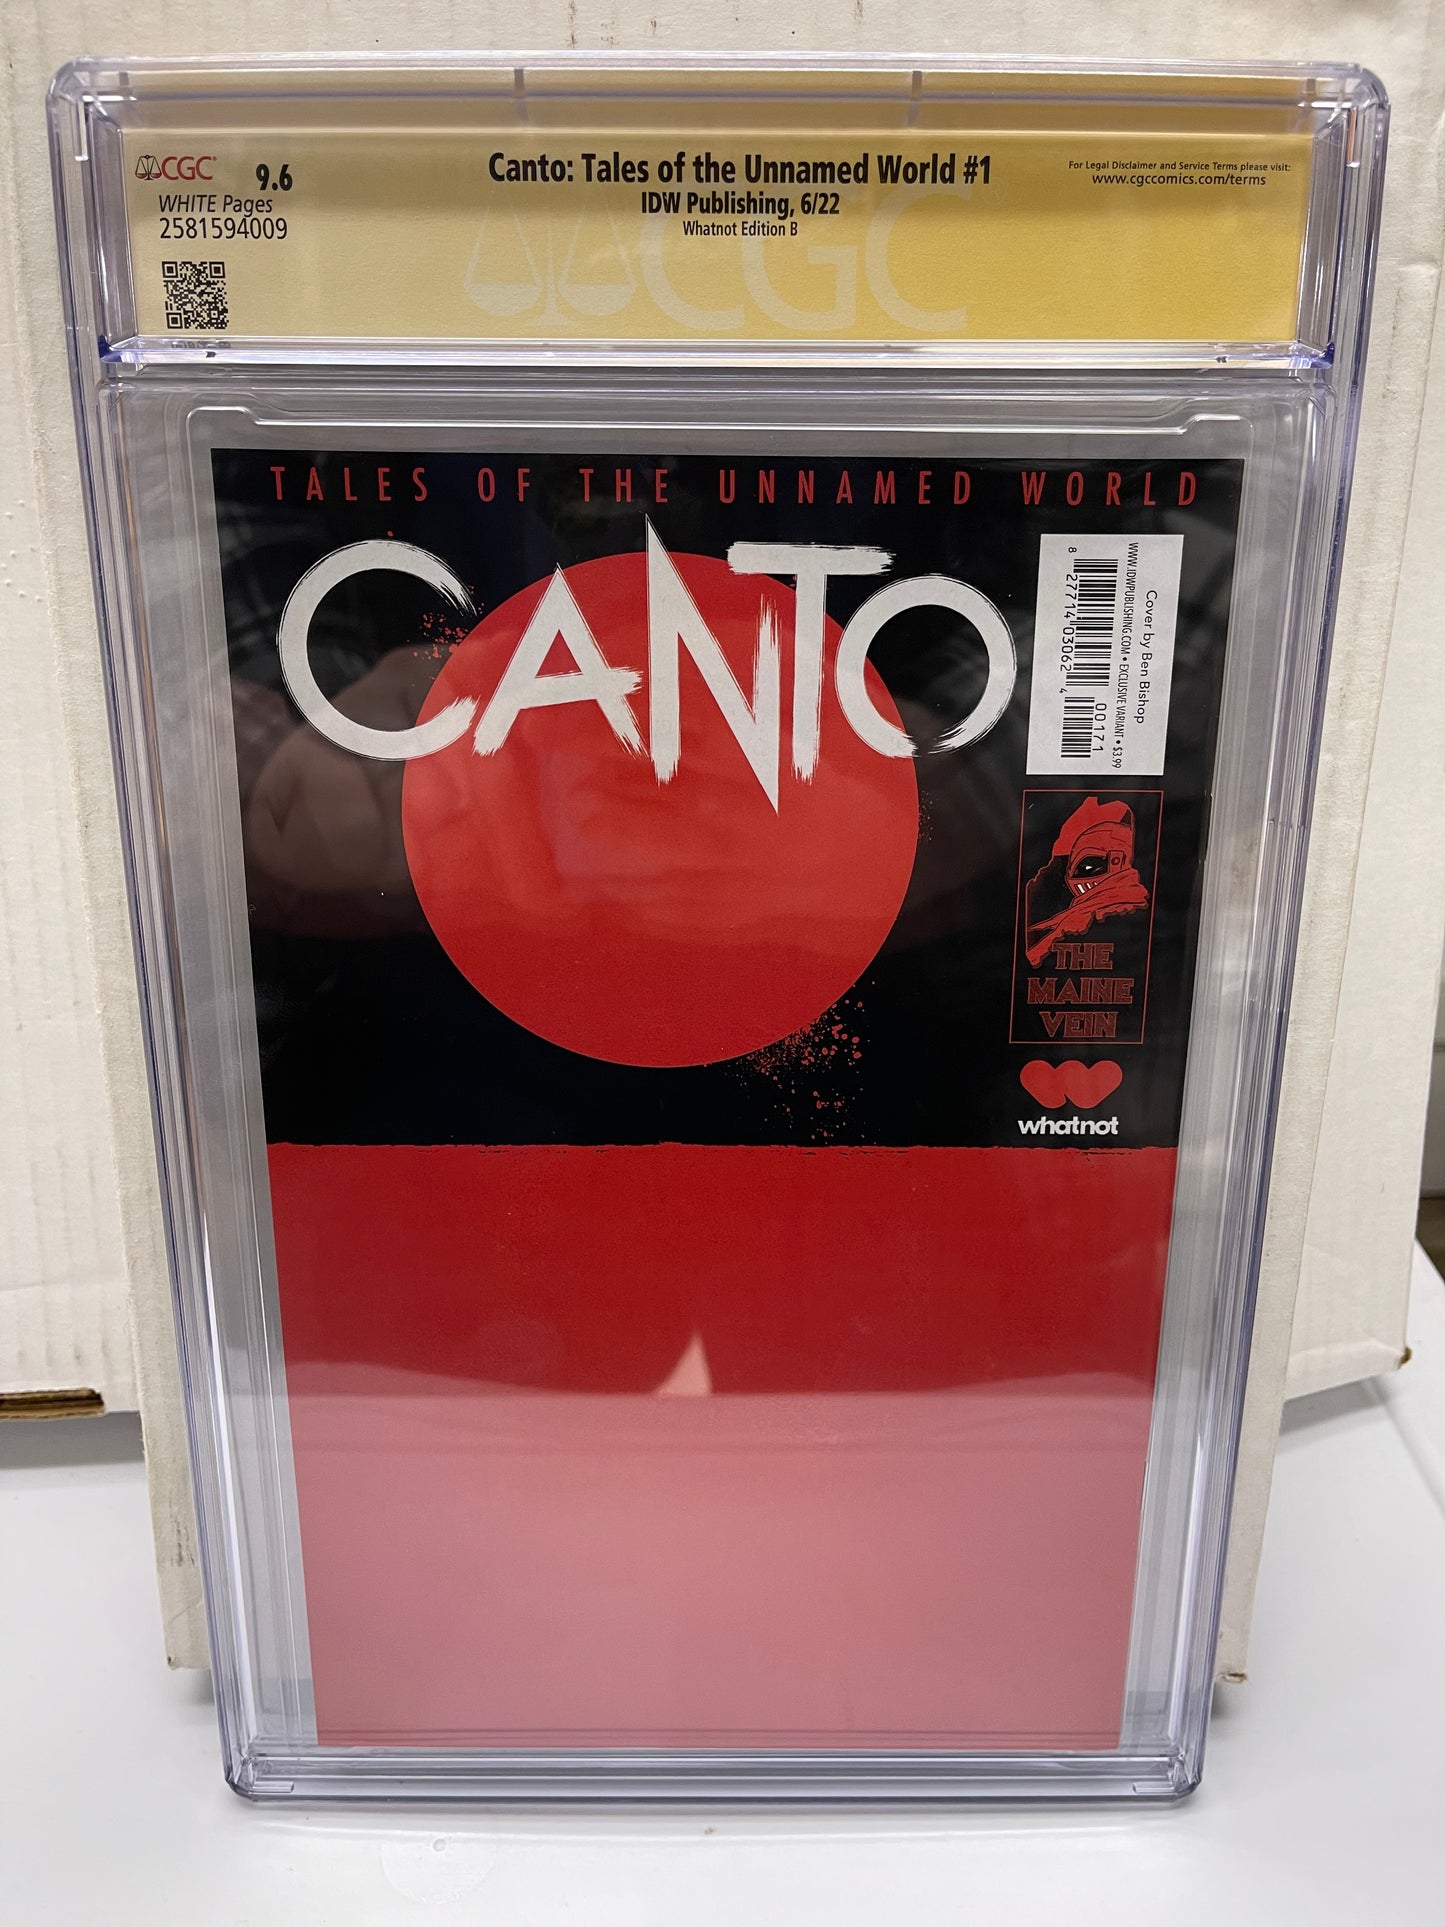 Canto Tales Of The Unnamed World #1 Ben Bishop WhatNot Last Ronin Homage CGC Signature Series - 9.6 (Signed by Ben Bishop) #2